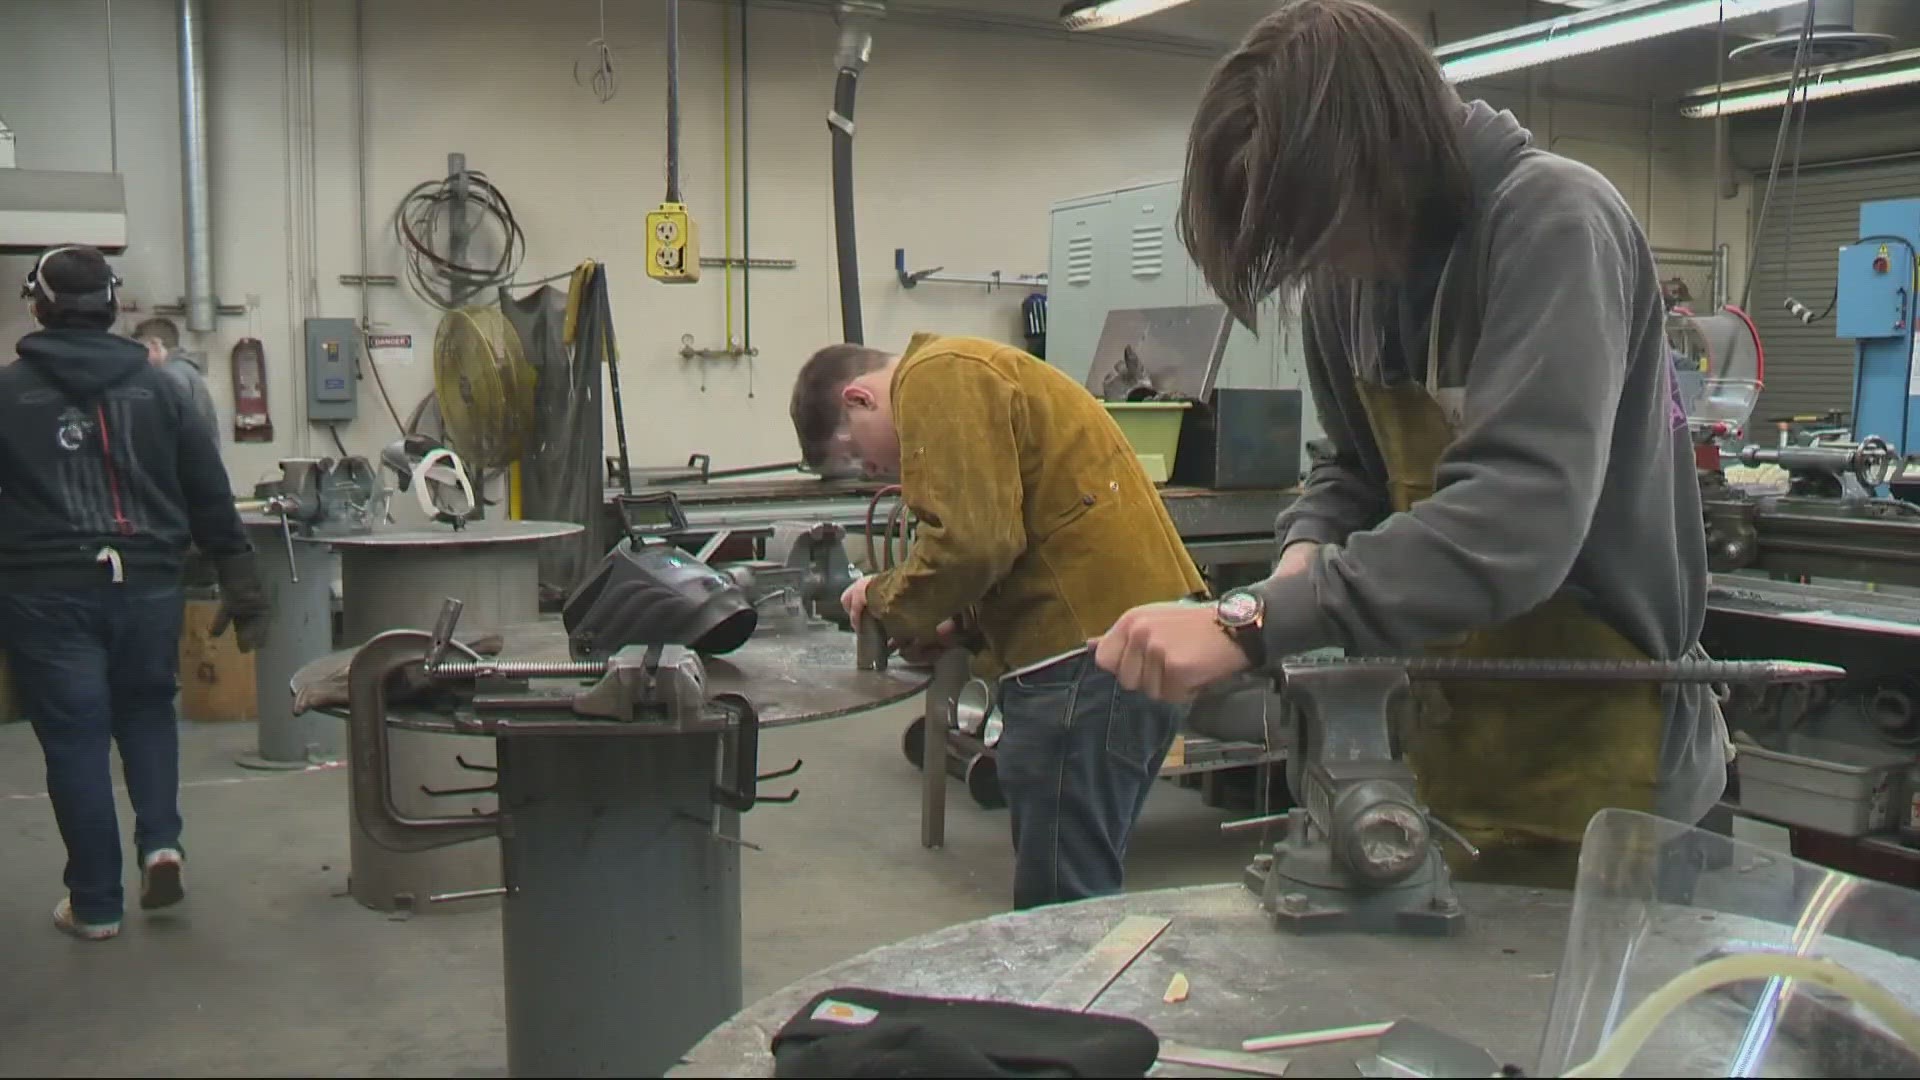 Washougal High School students are helping during Earth Week by creating trophies from recycled materials.